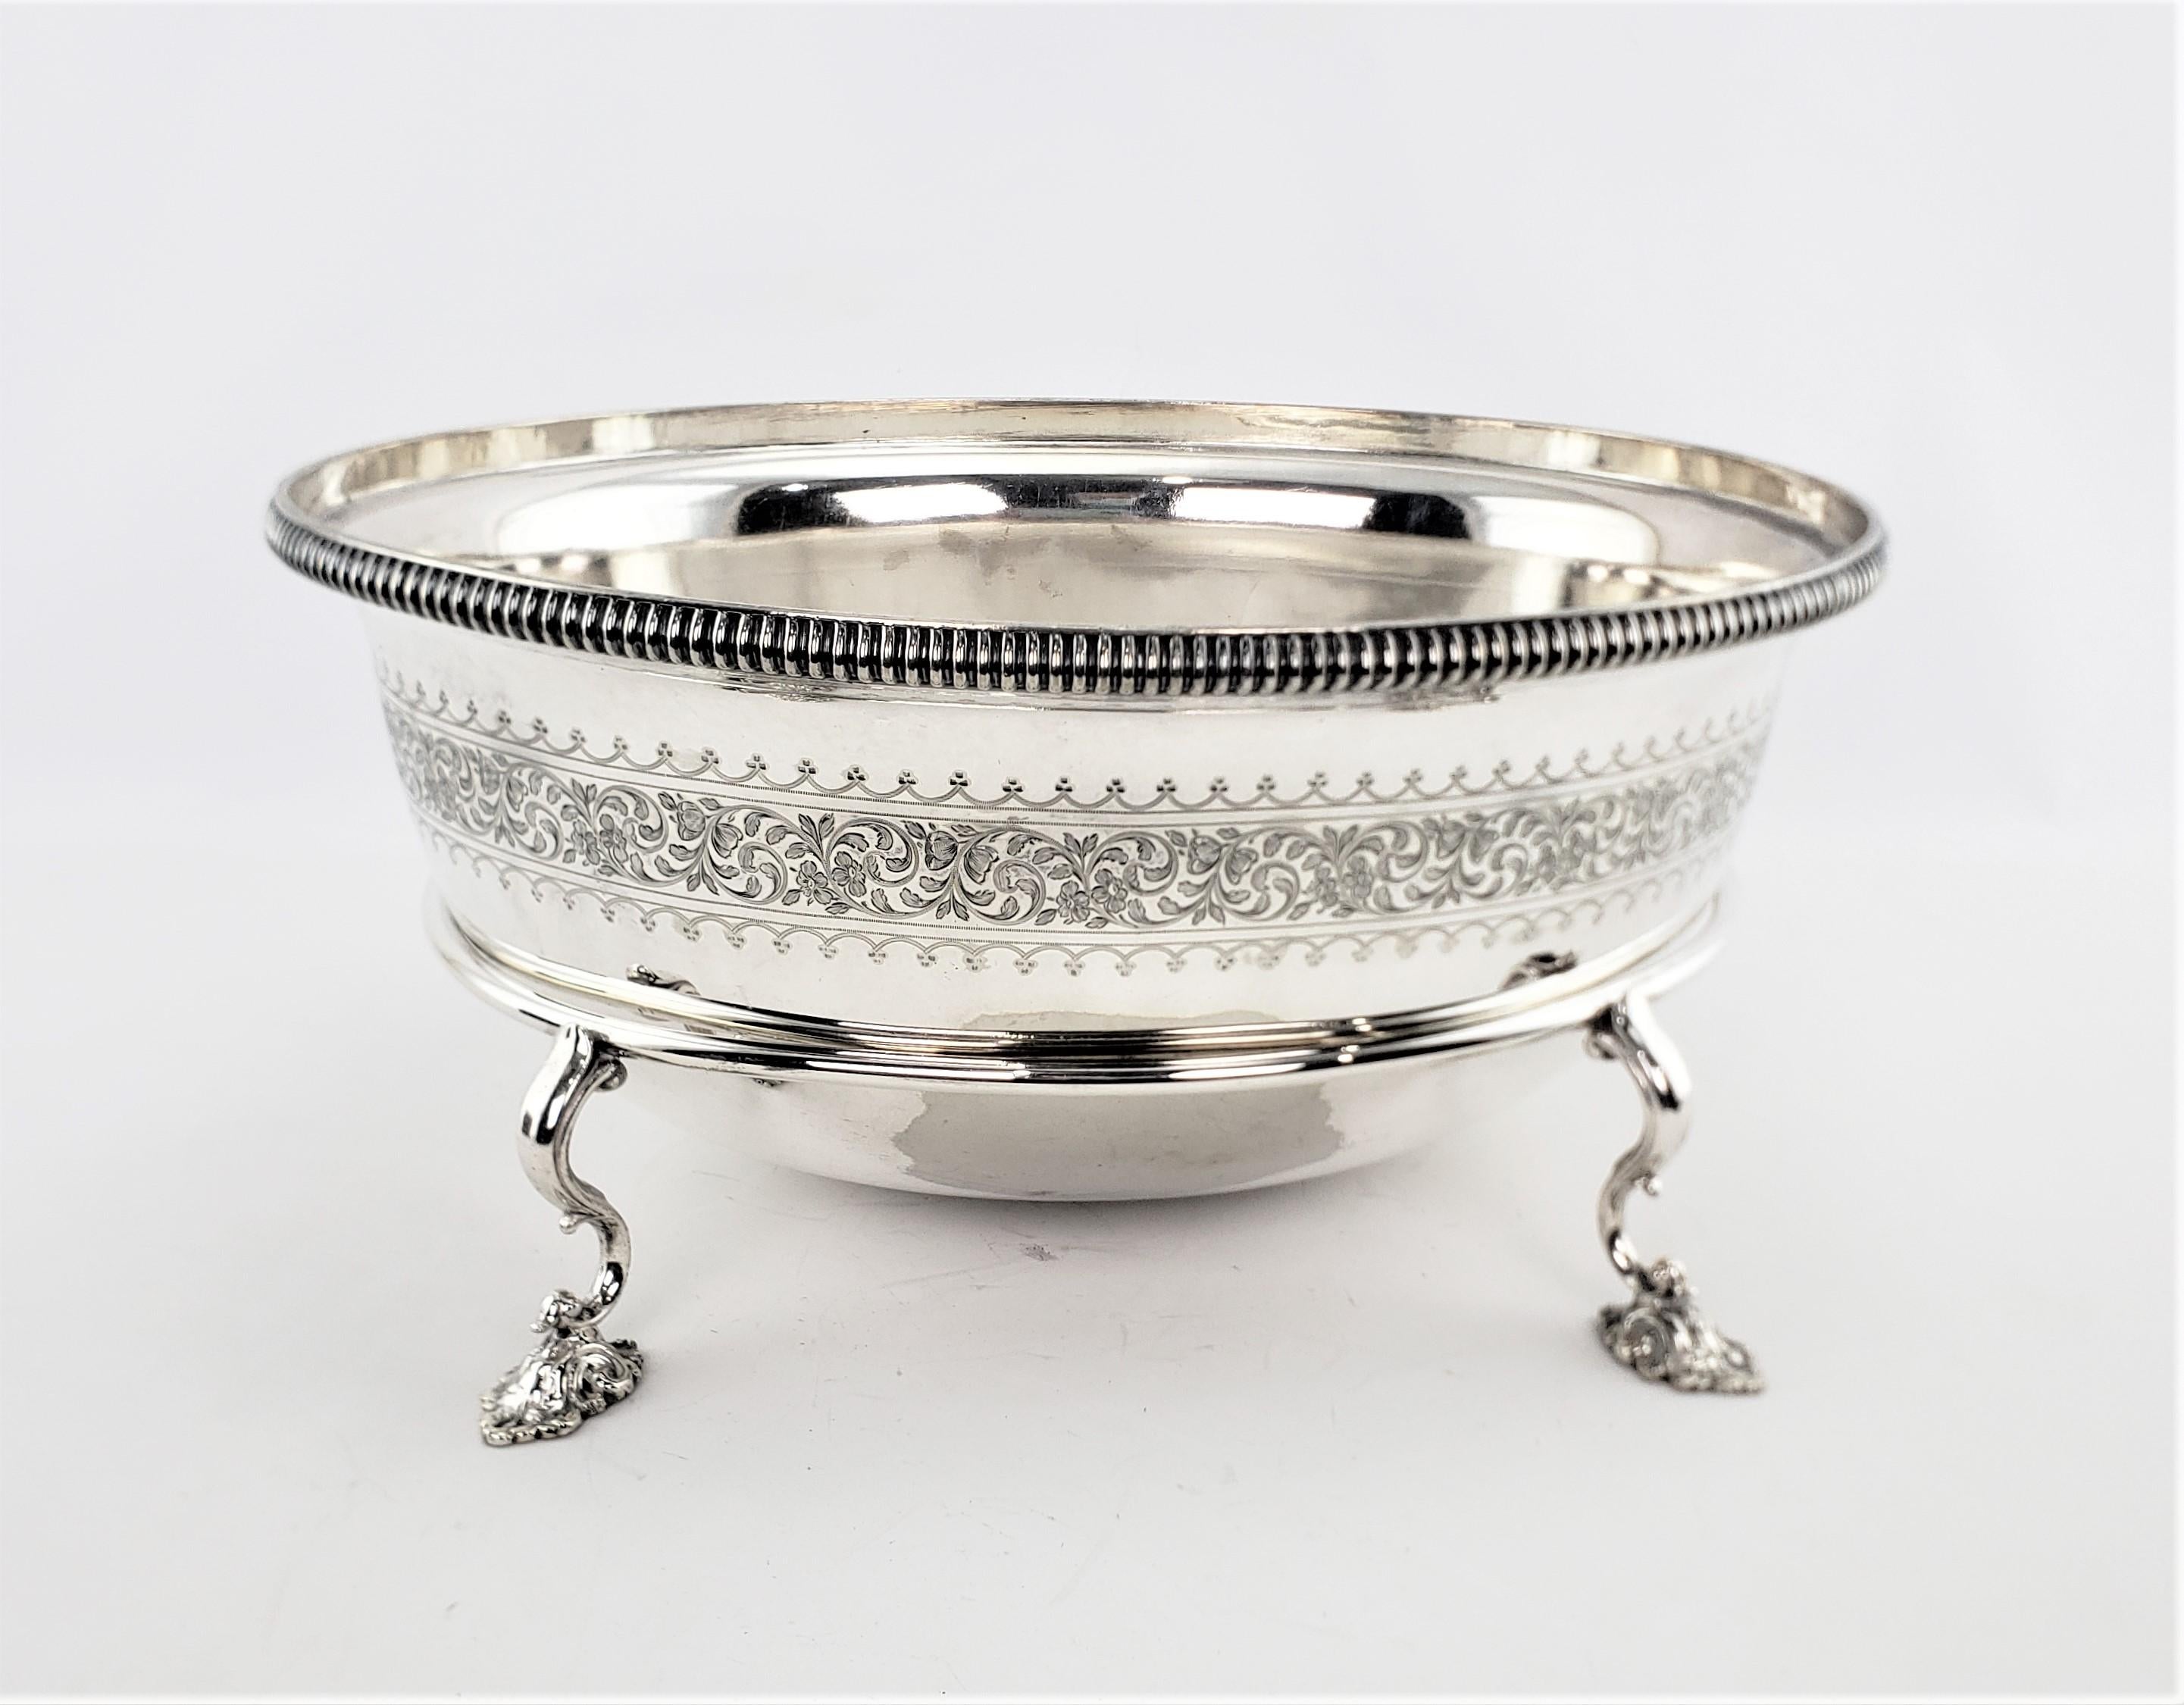 This extremely large and substantial ice trough or centerpiece is a marriage of an inverted meat dome with a silver plated stand. The meat dome has no maker's mark, but presumed to have been made in England in circa 1890. The handle of the dome has